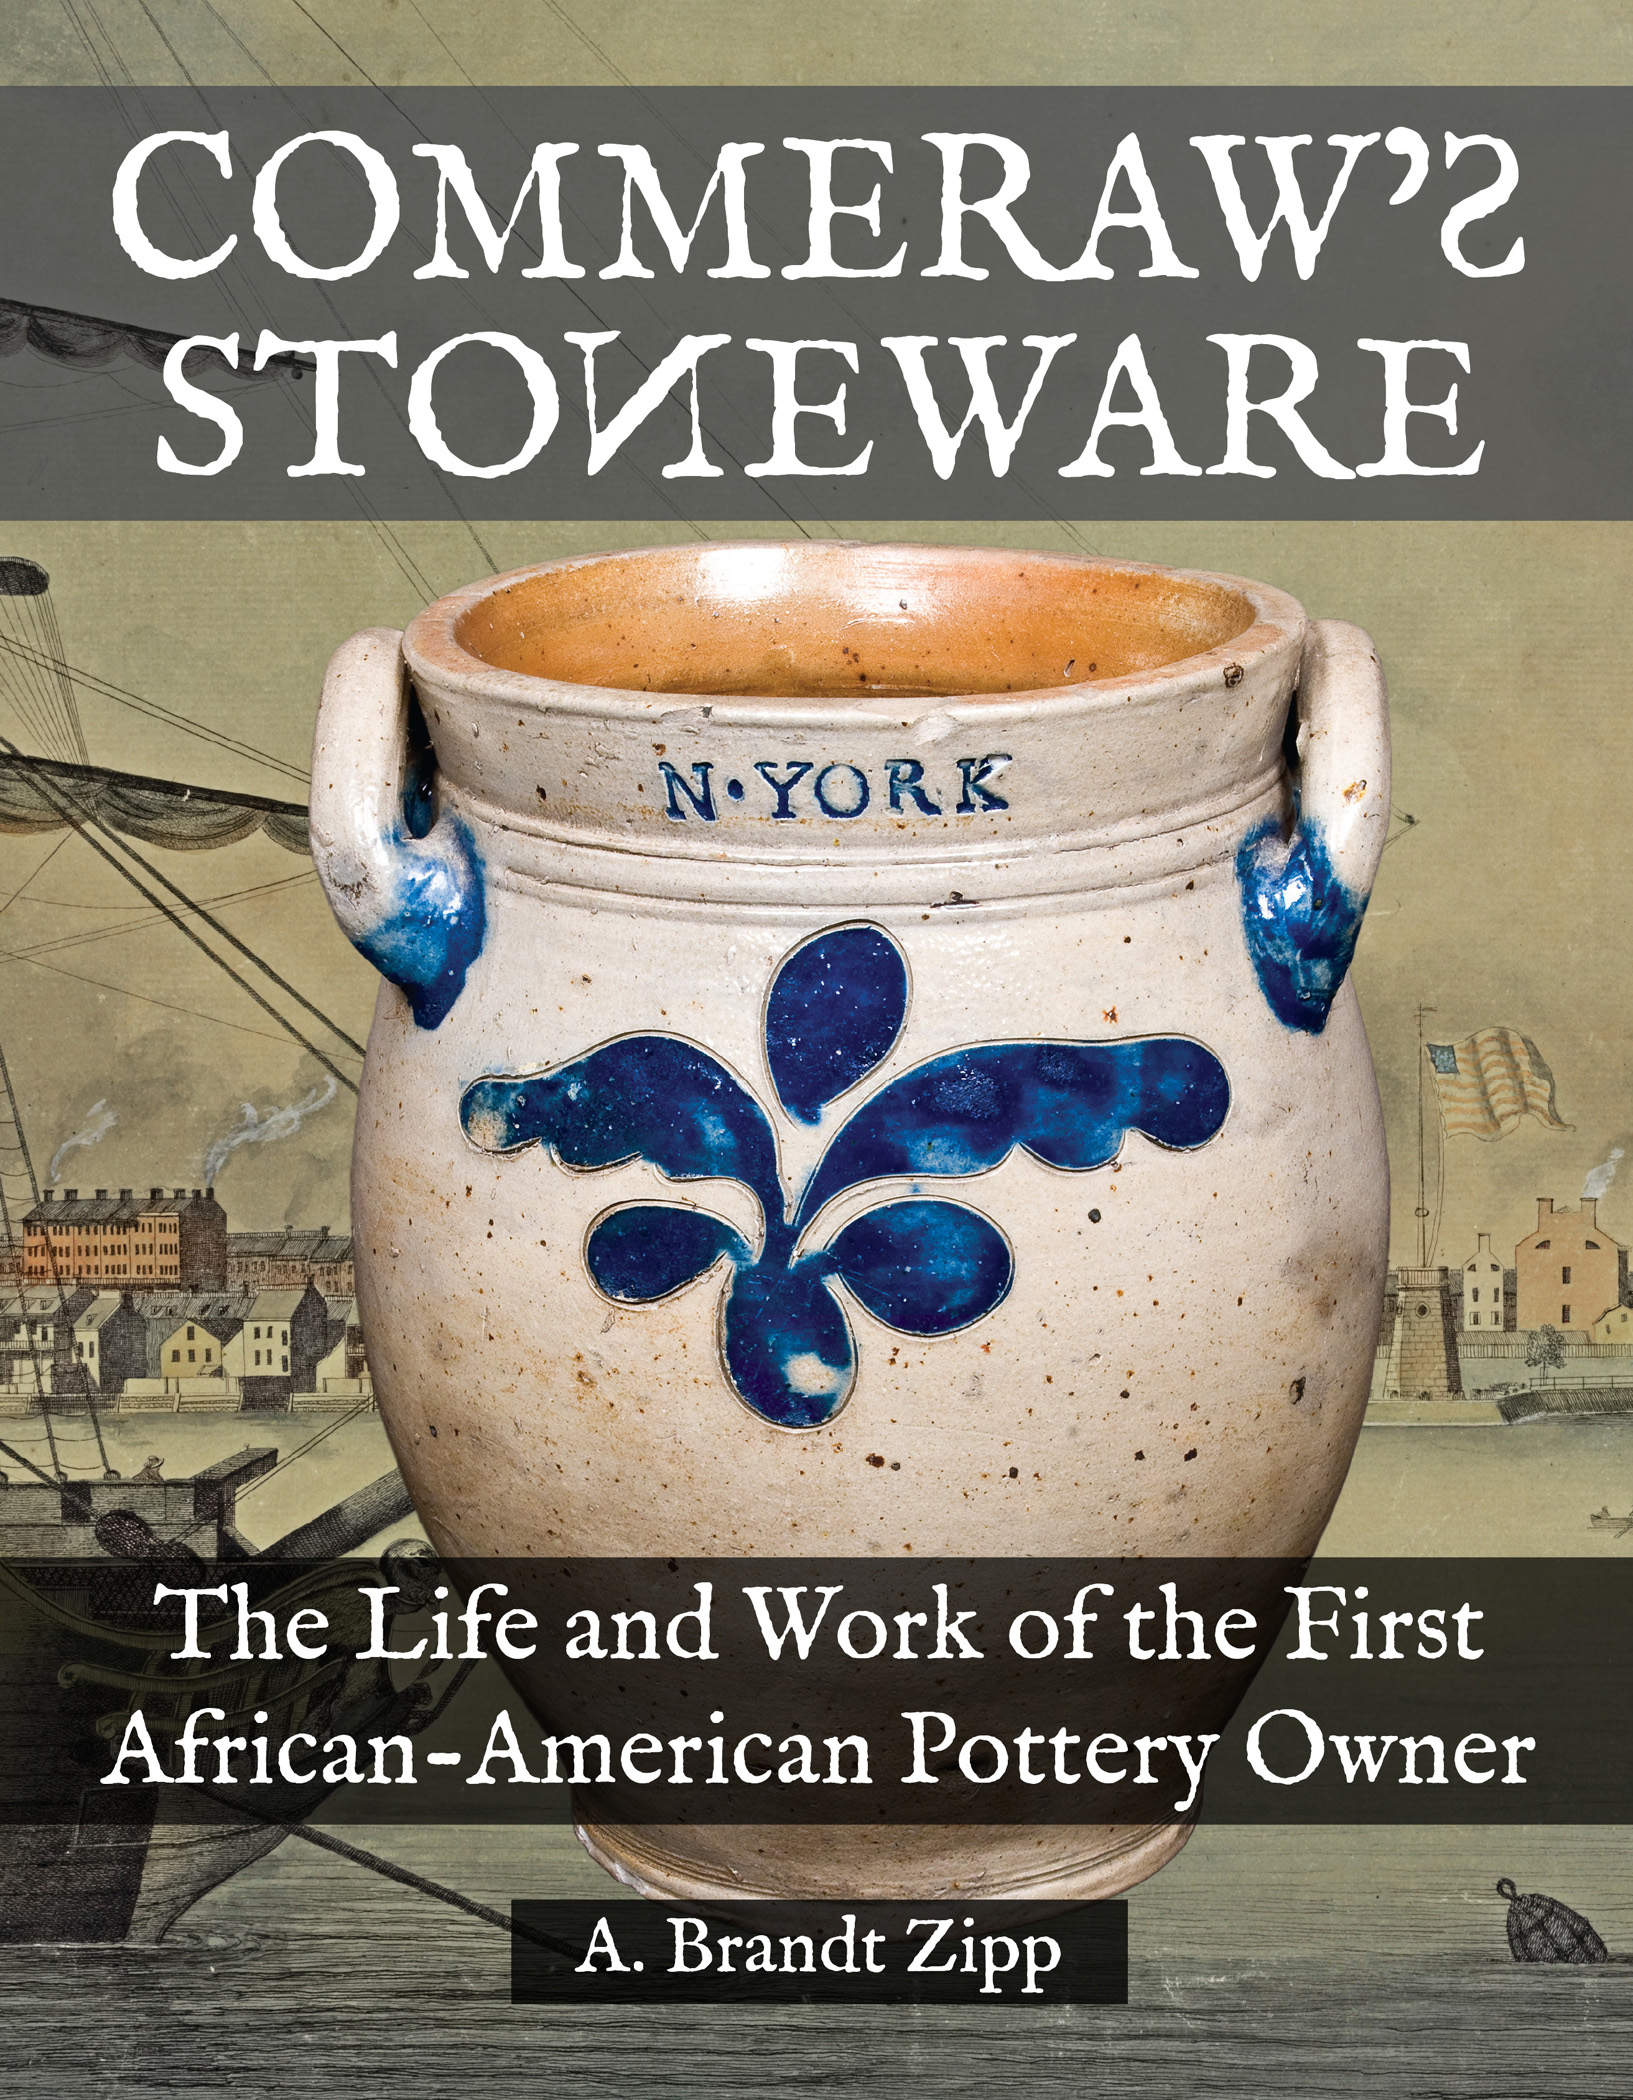 Commeraw's Stoneware: The Life and Work of the First African-American Pottery Owner